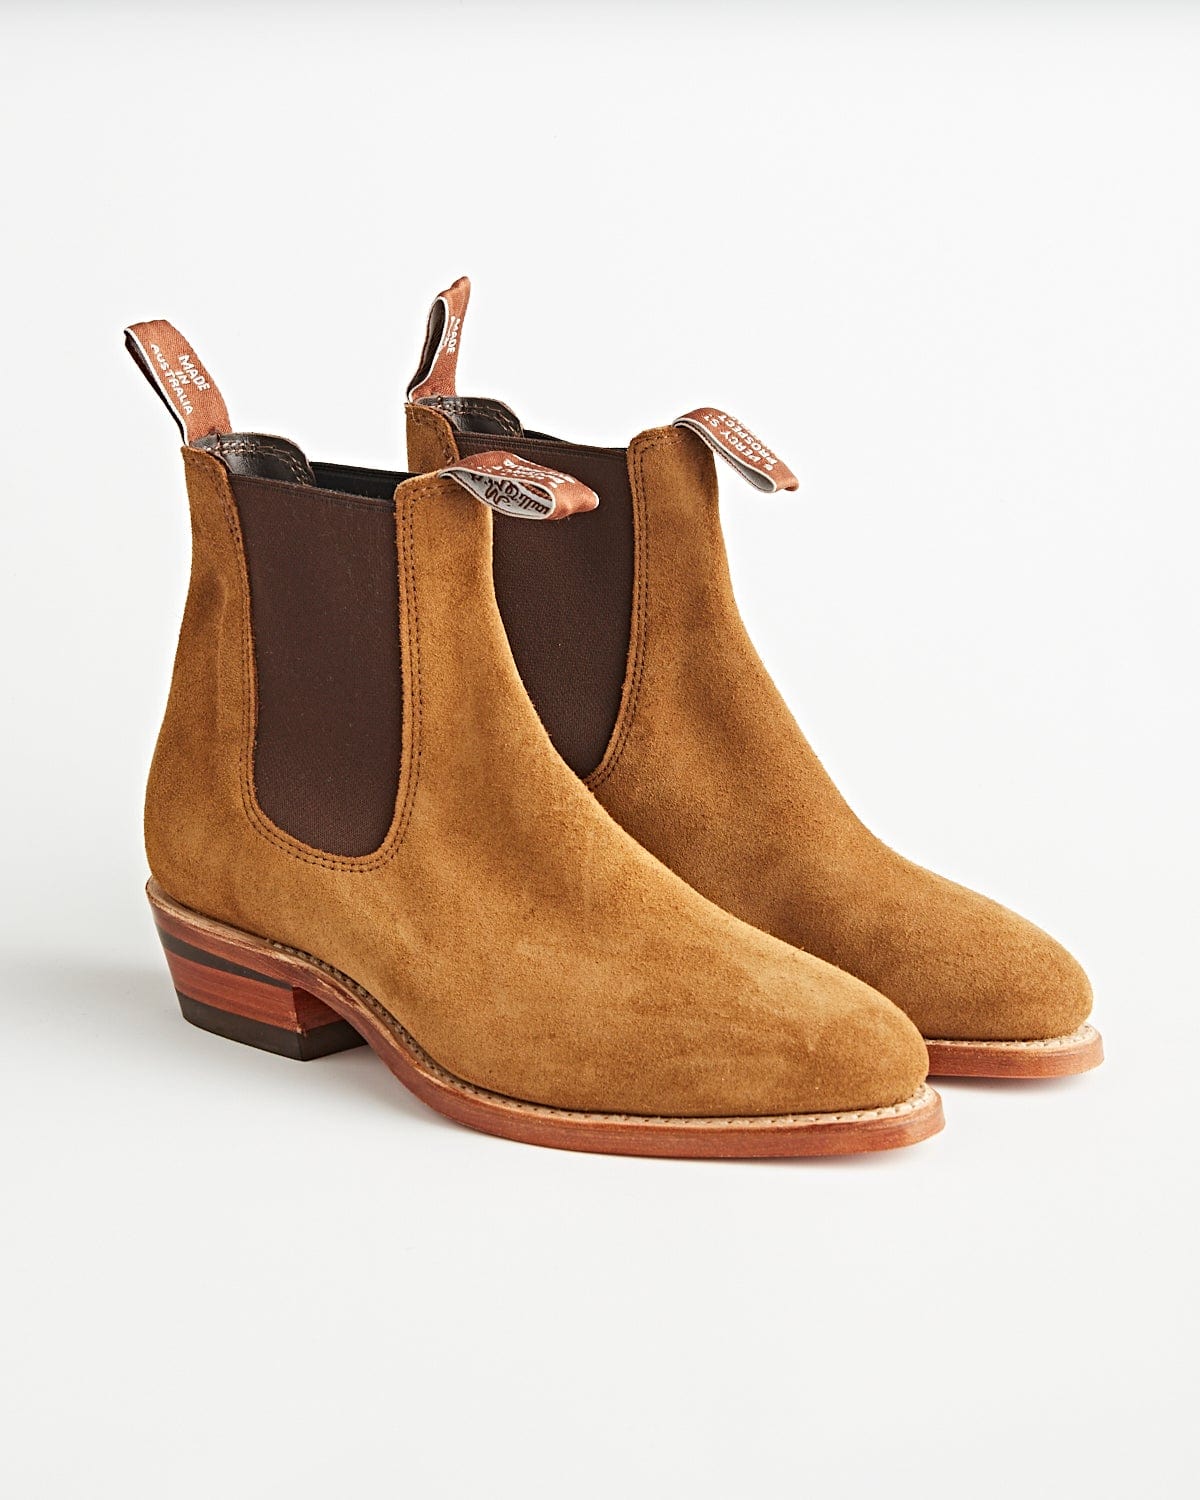 Black Lady Yearling Boots, R.M.Williams Chelsea Boots